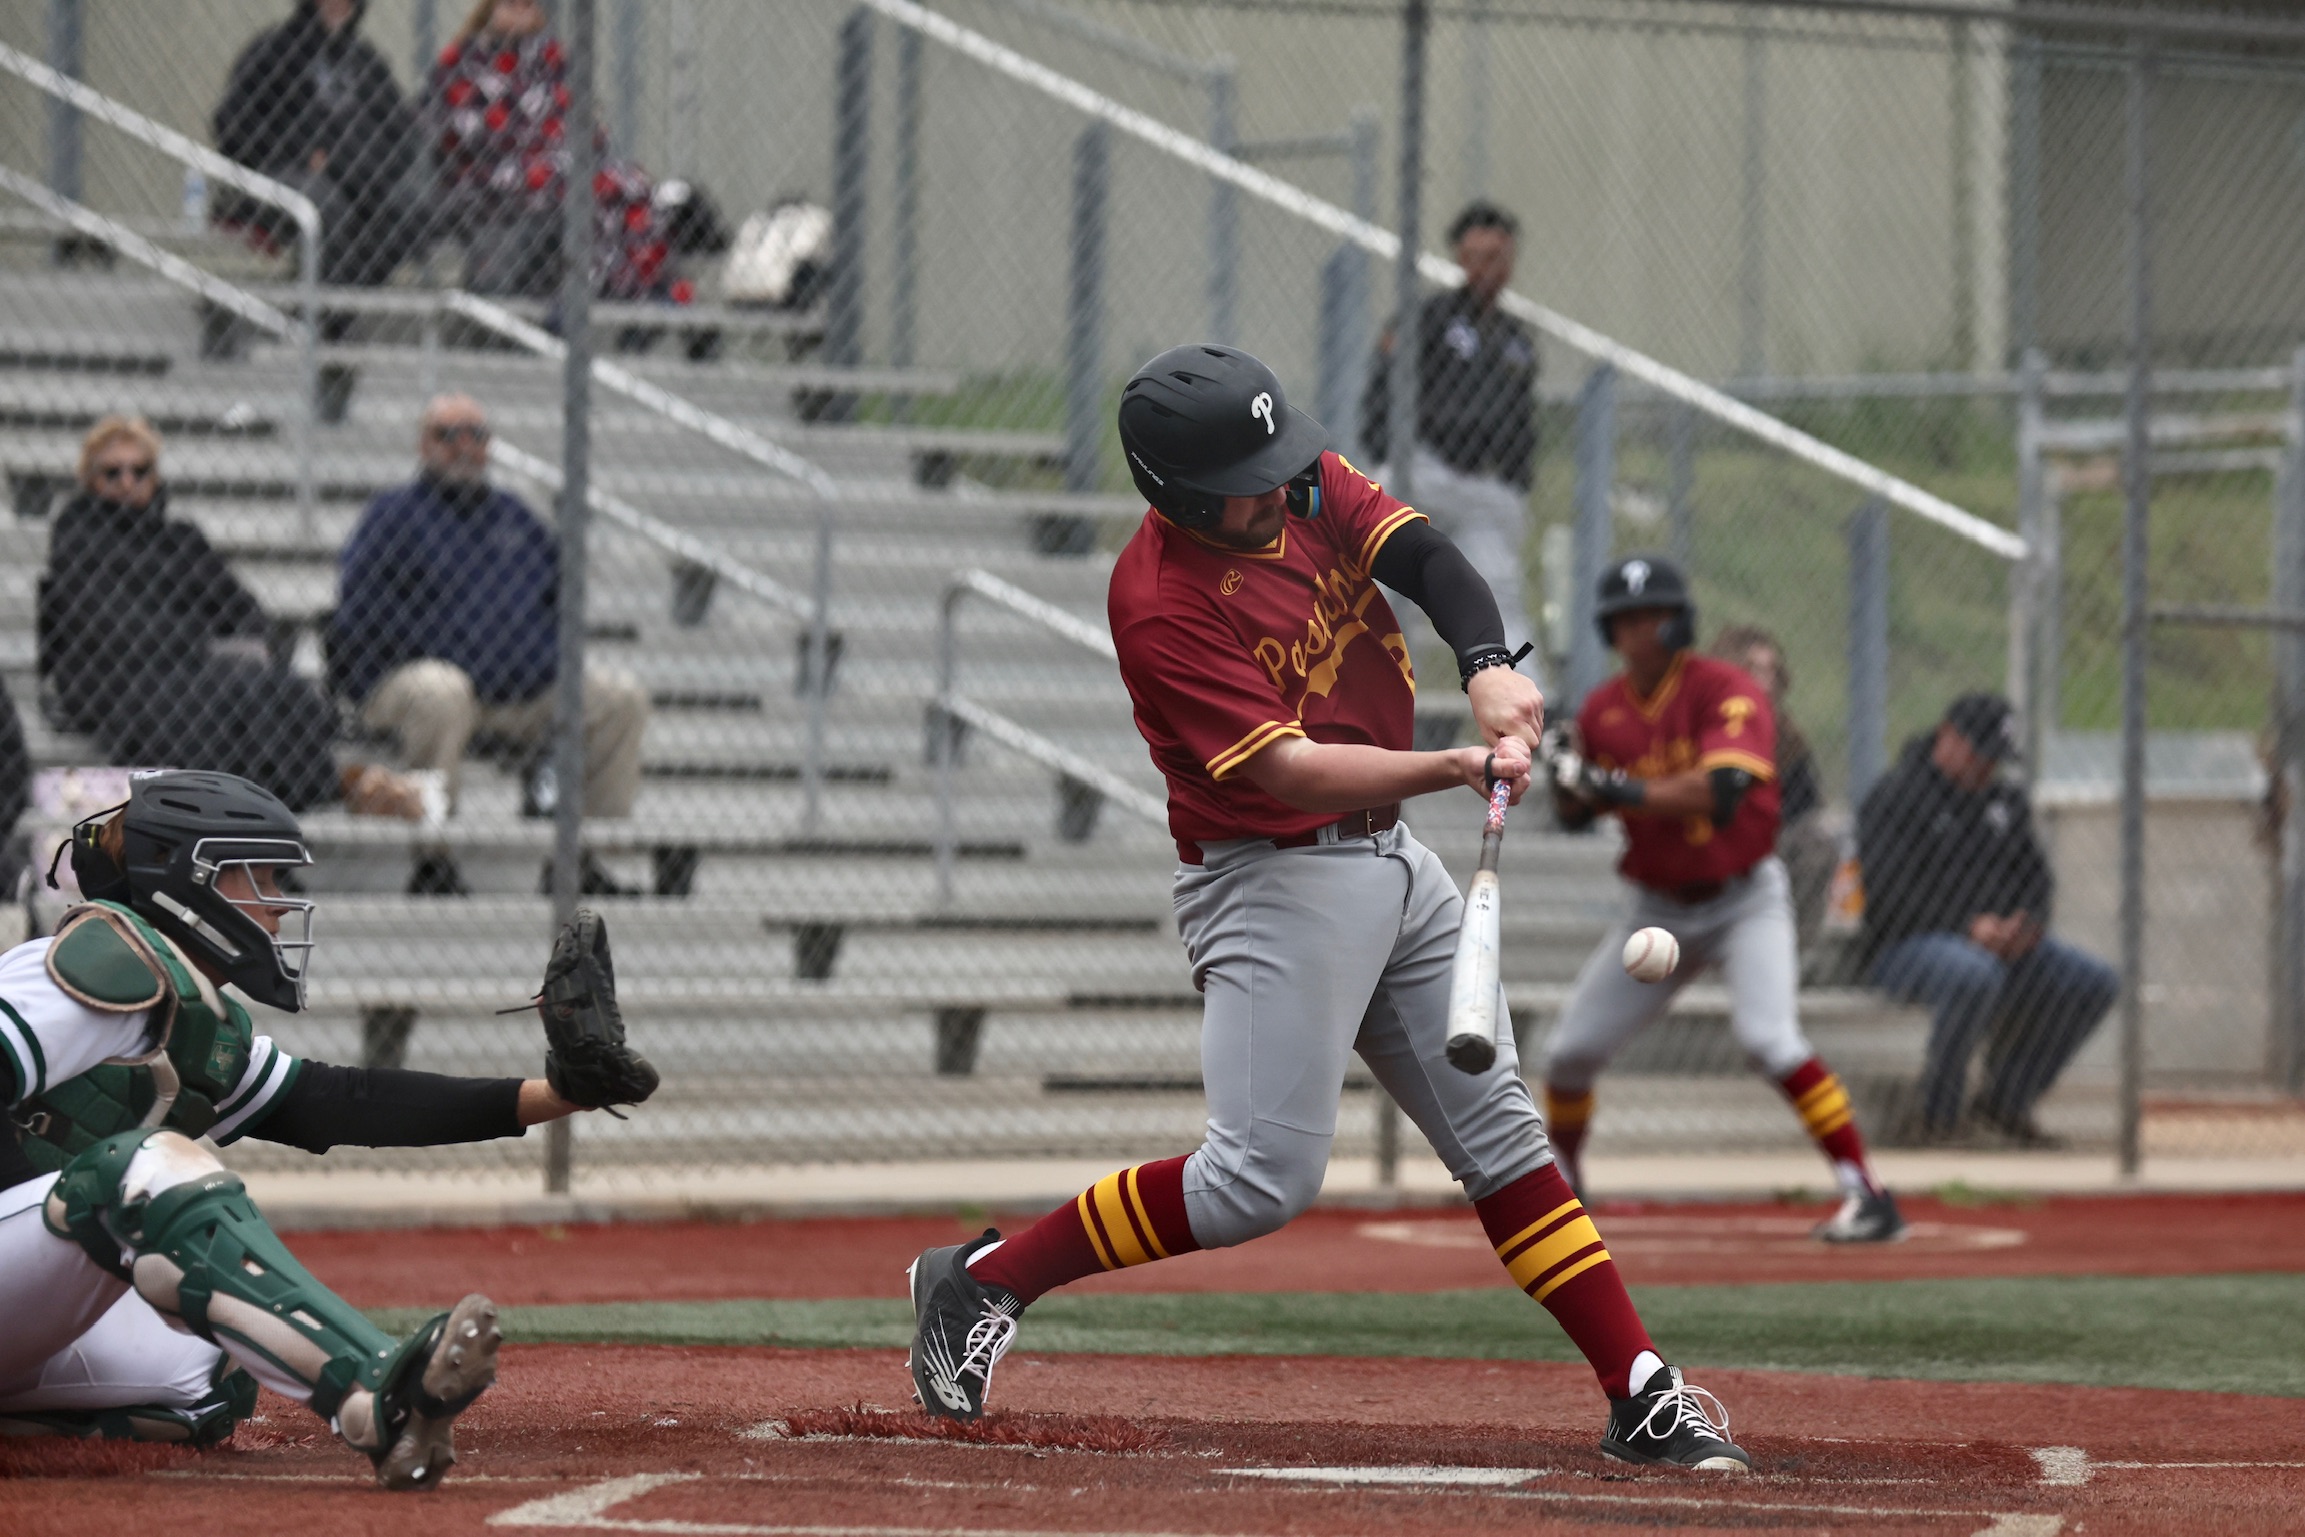 Jake Trabbie rips a ball during the ELAC-PCC series (photo by Michael Watkins).